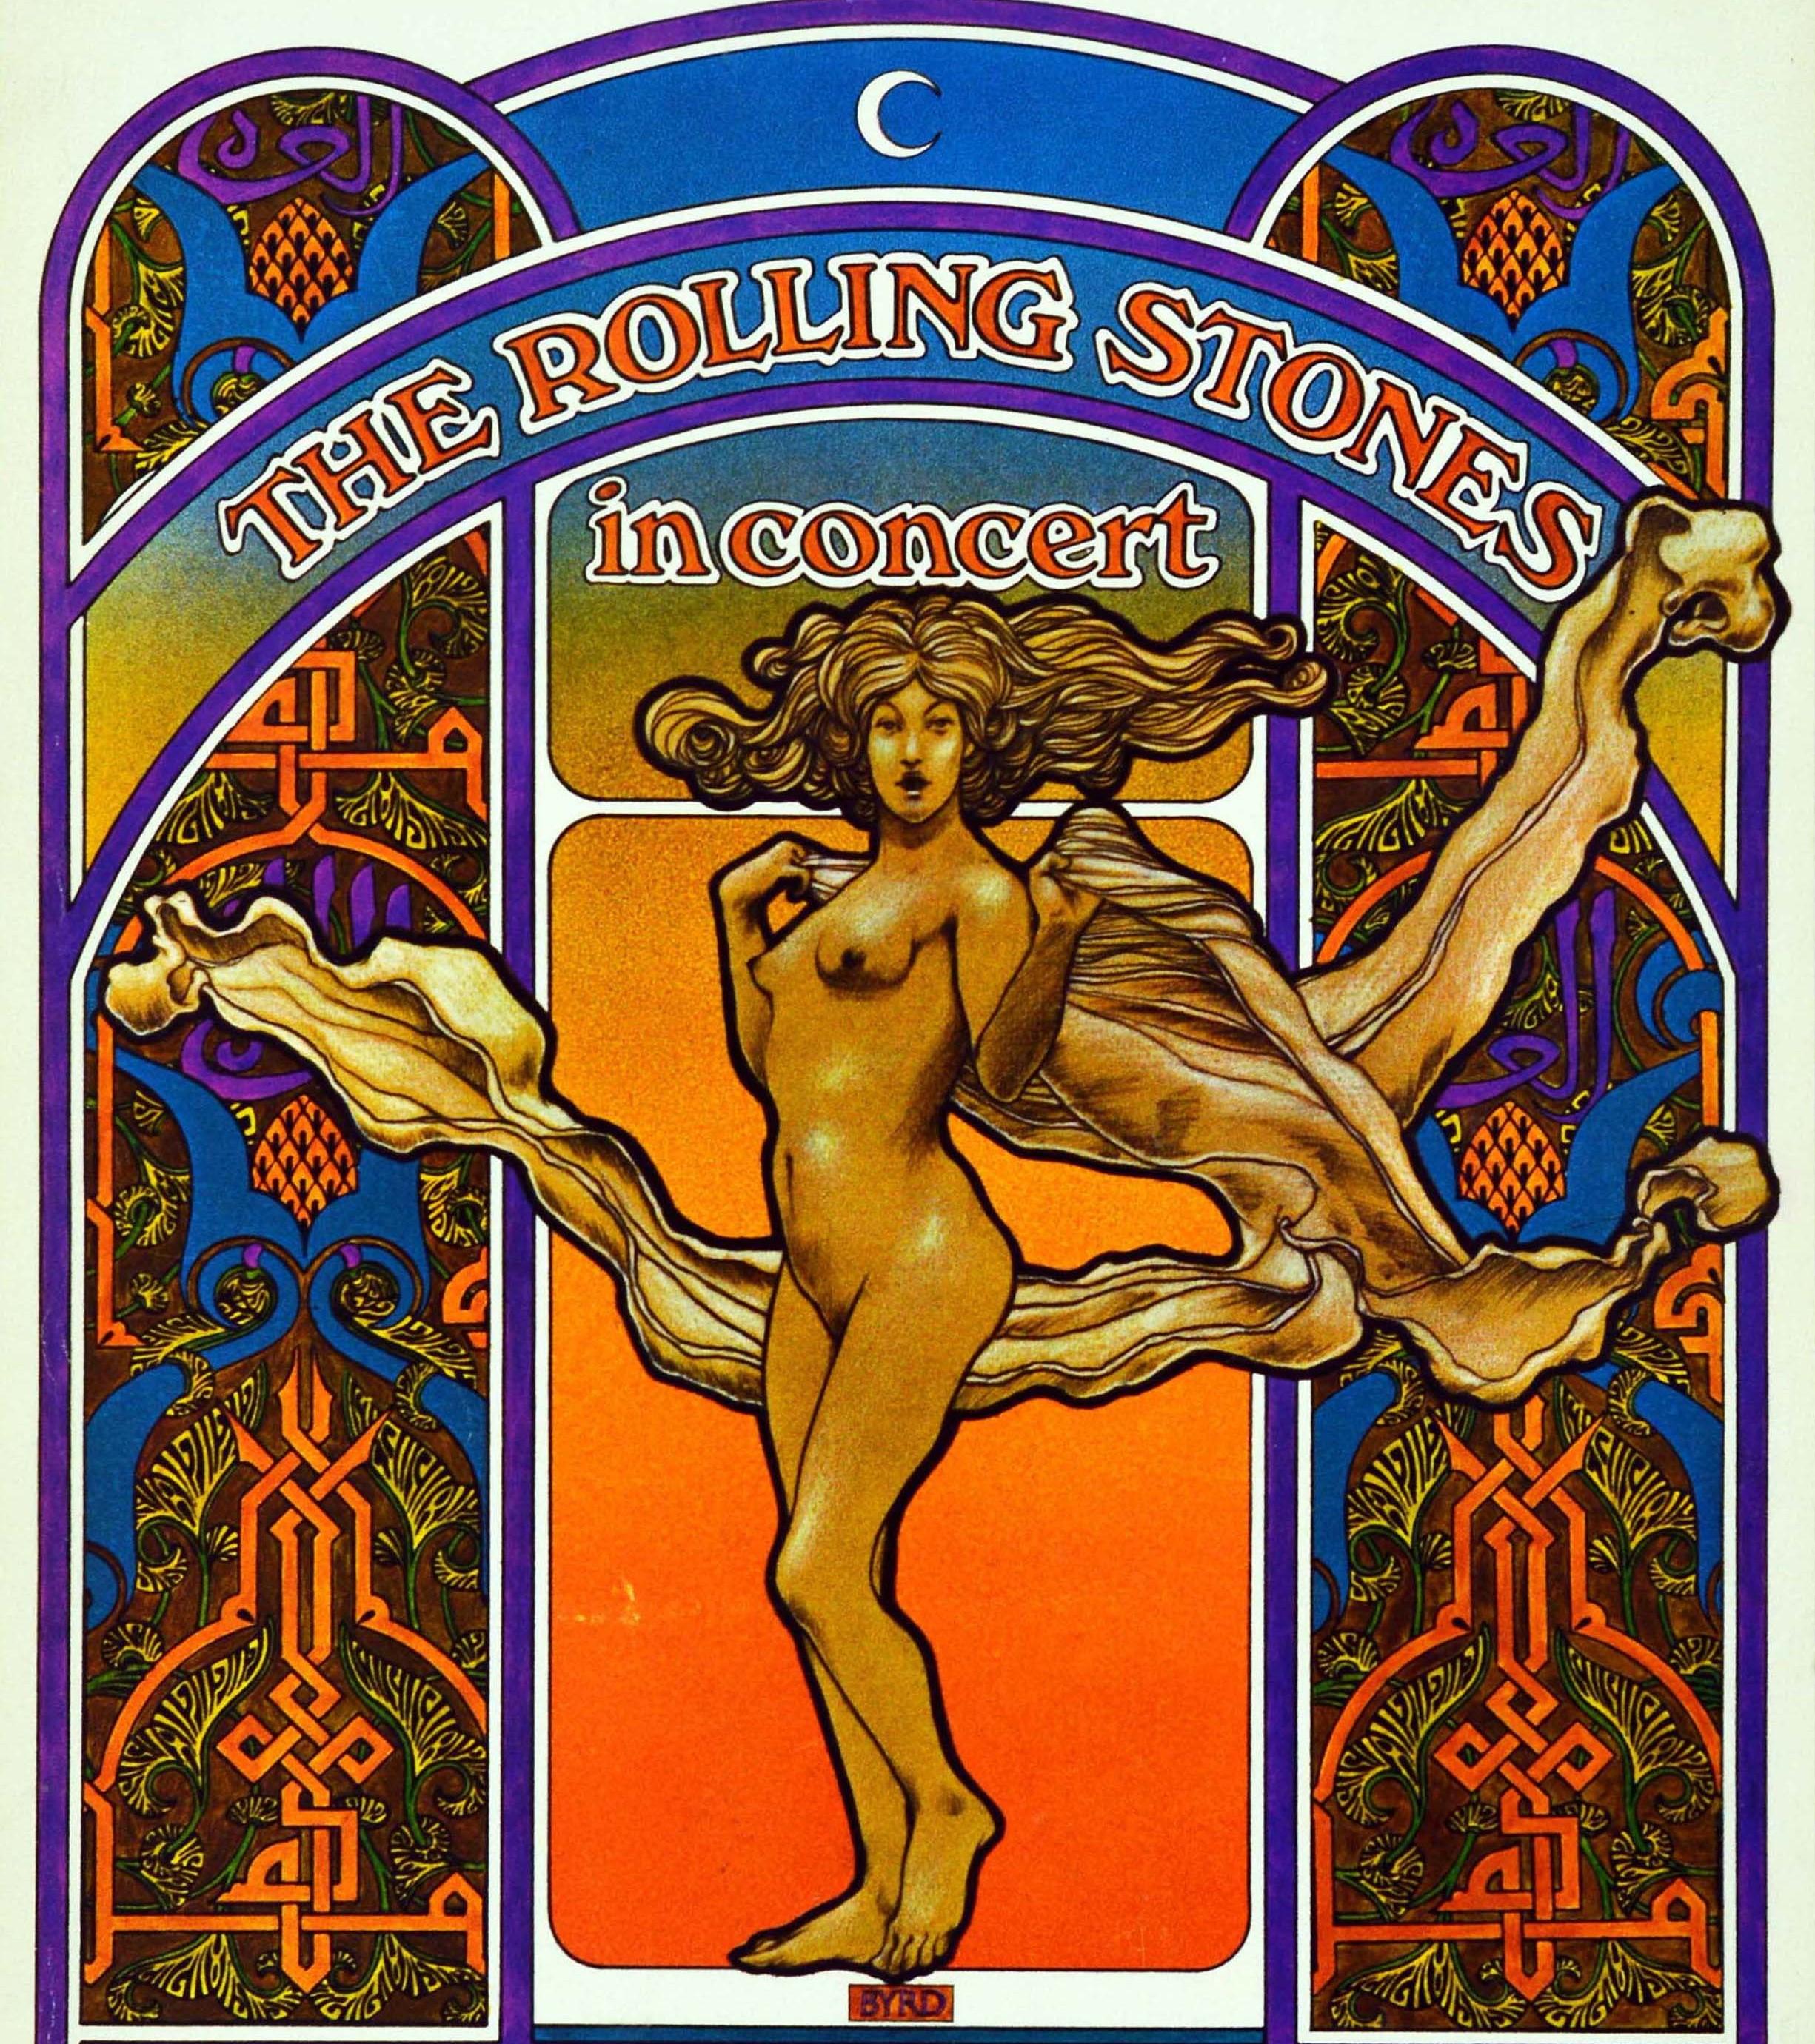 Original vintage music poster for The Rolling Stones in Concert world tour 1969-1970 featuring a vibrant colourful image by the notable American graphic designer David Edward Byrd (b 1941) of an Art Nouveau style figure with flowing hair in the